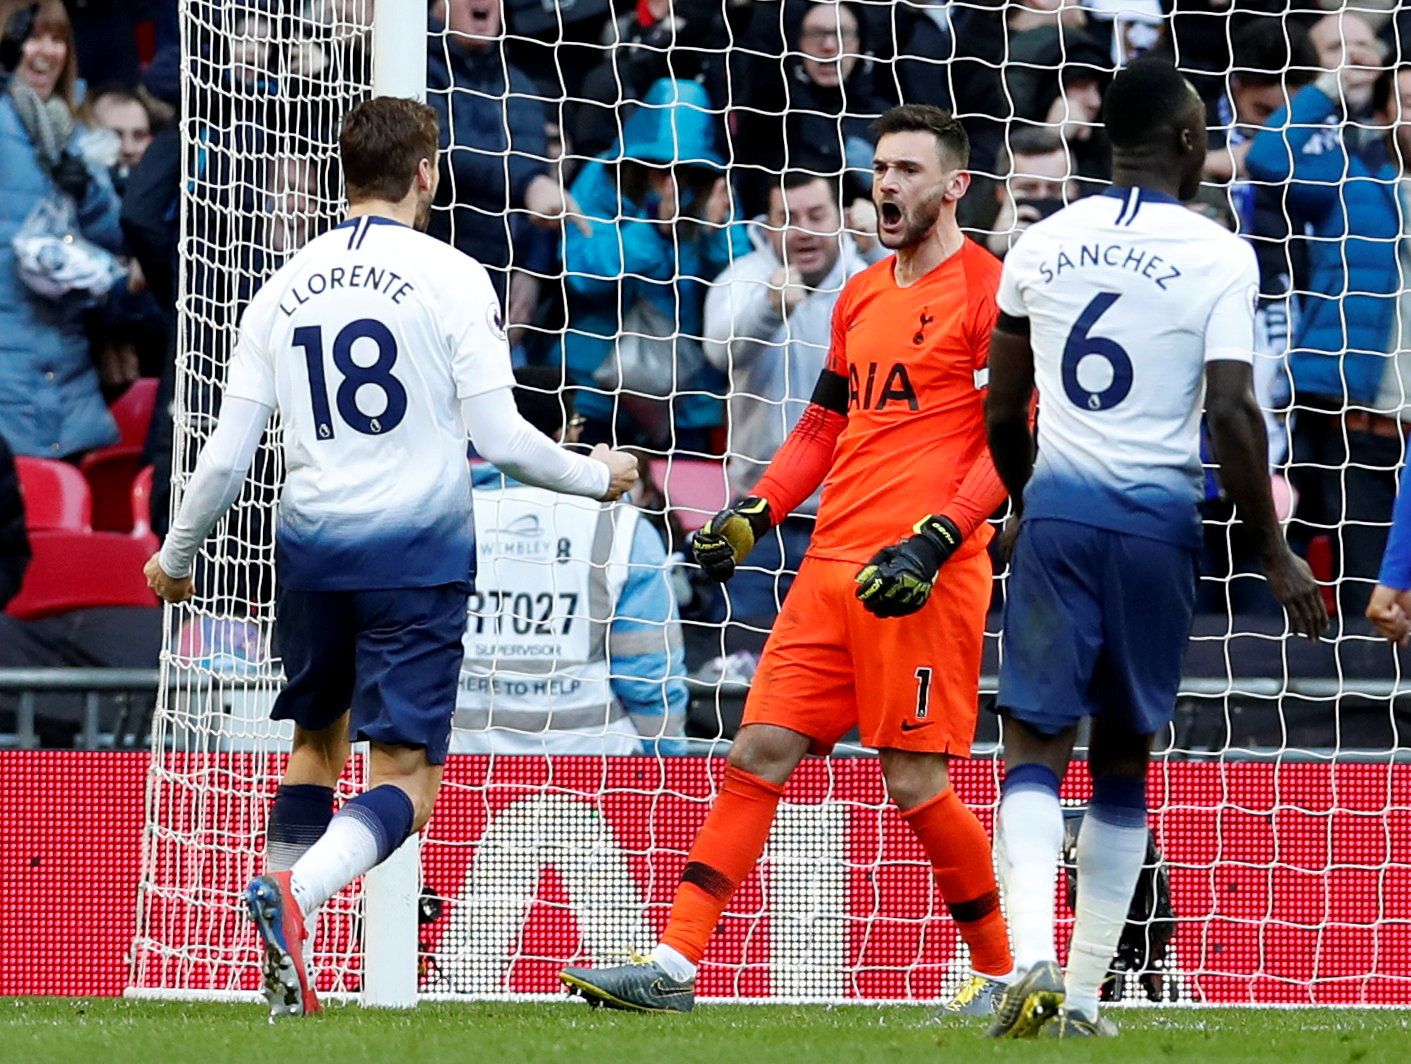 Soccer Football - Premier League - Tottenham Hotspur v Leicester City - Wembley Stadium, London, Britain - February 10, 2019  Tottenham's Hugo Lloris celebrates saving a penalty against Leicester City's Jamie Vardy      REUTERS/David Klein  EDITORIAL USE ONLY. No use with unauthorized audio, video, data, fixture lists, club/league logos or 